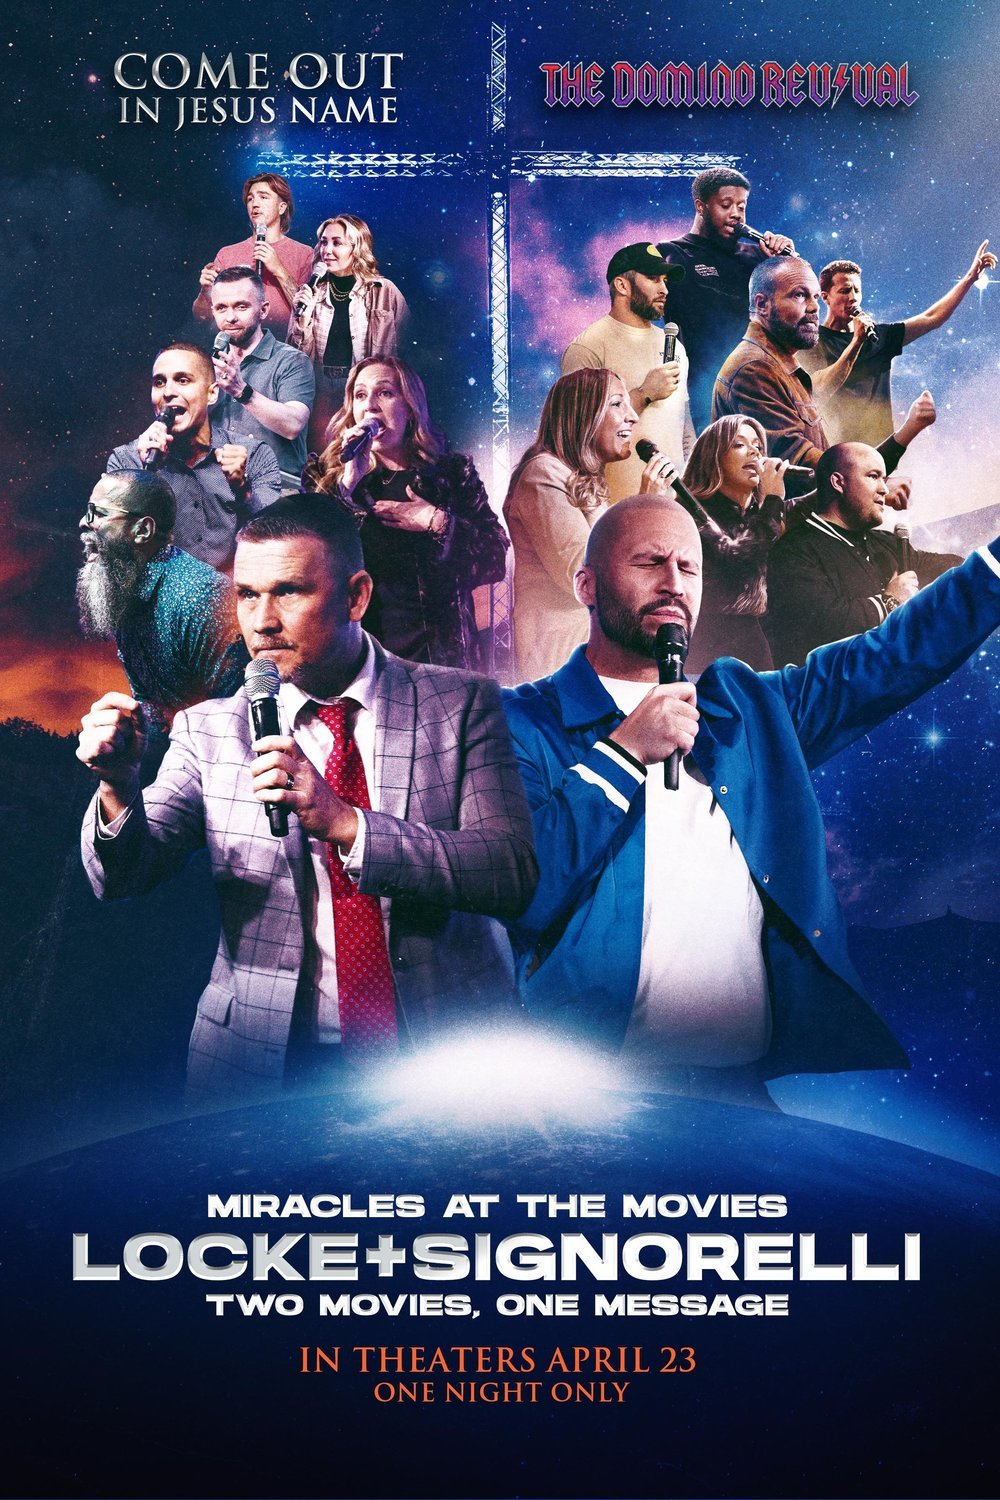 Poster of the movie Miracles at the Movies: Locke + Signorelli